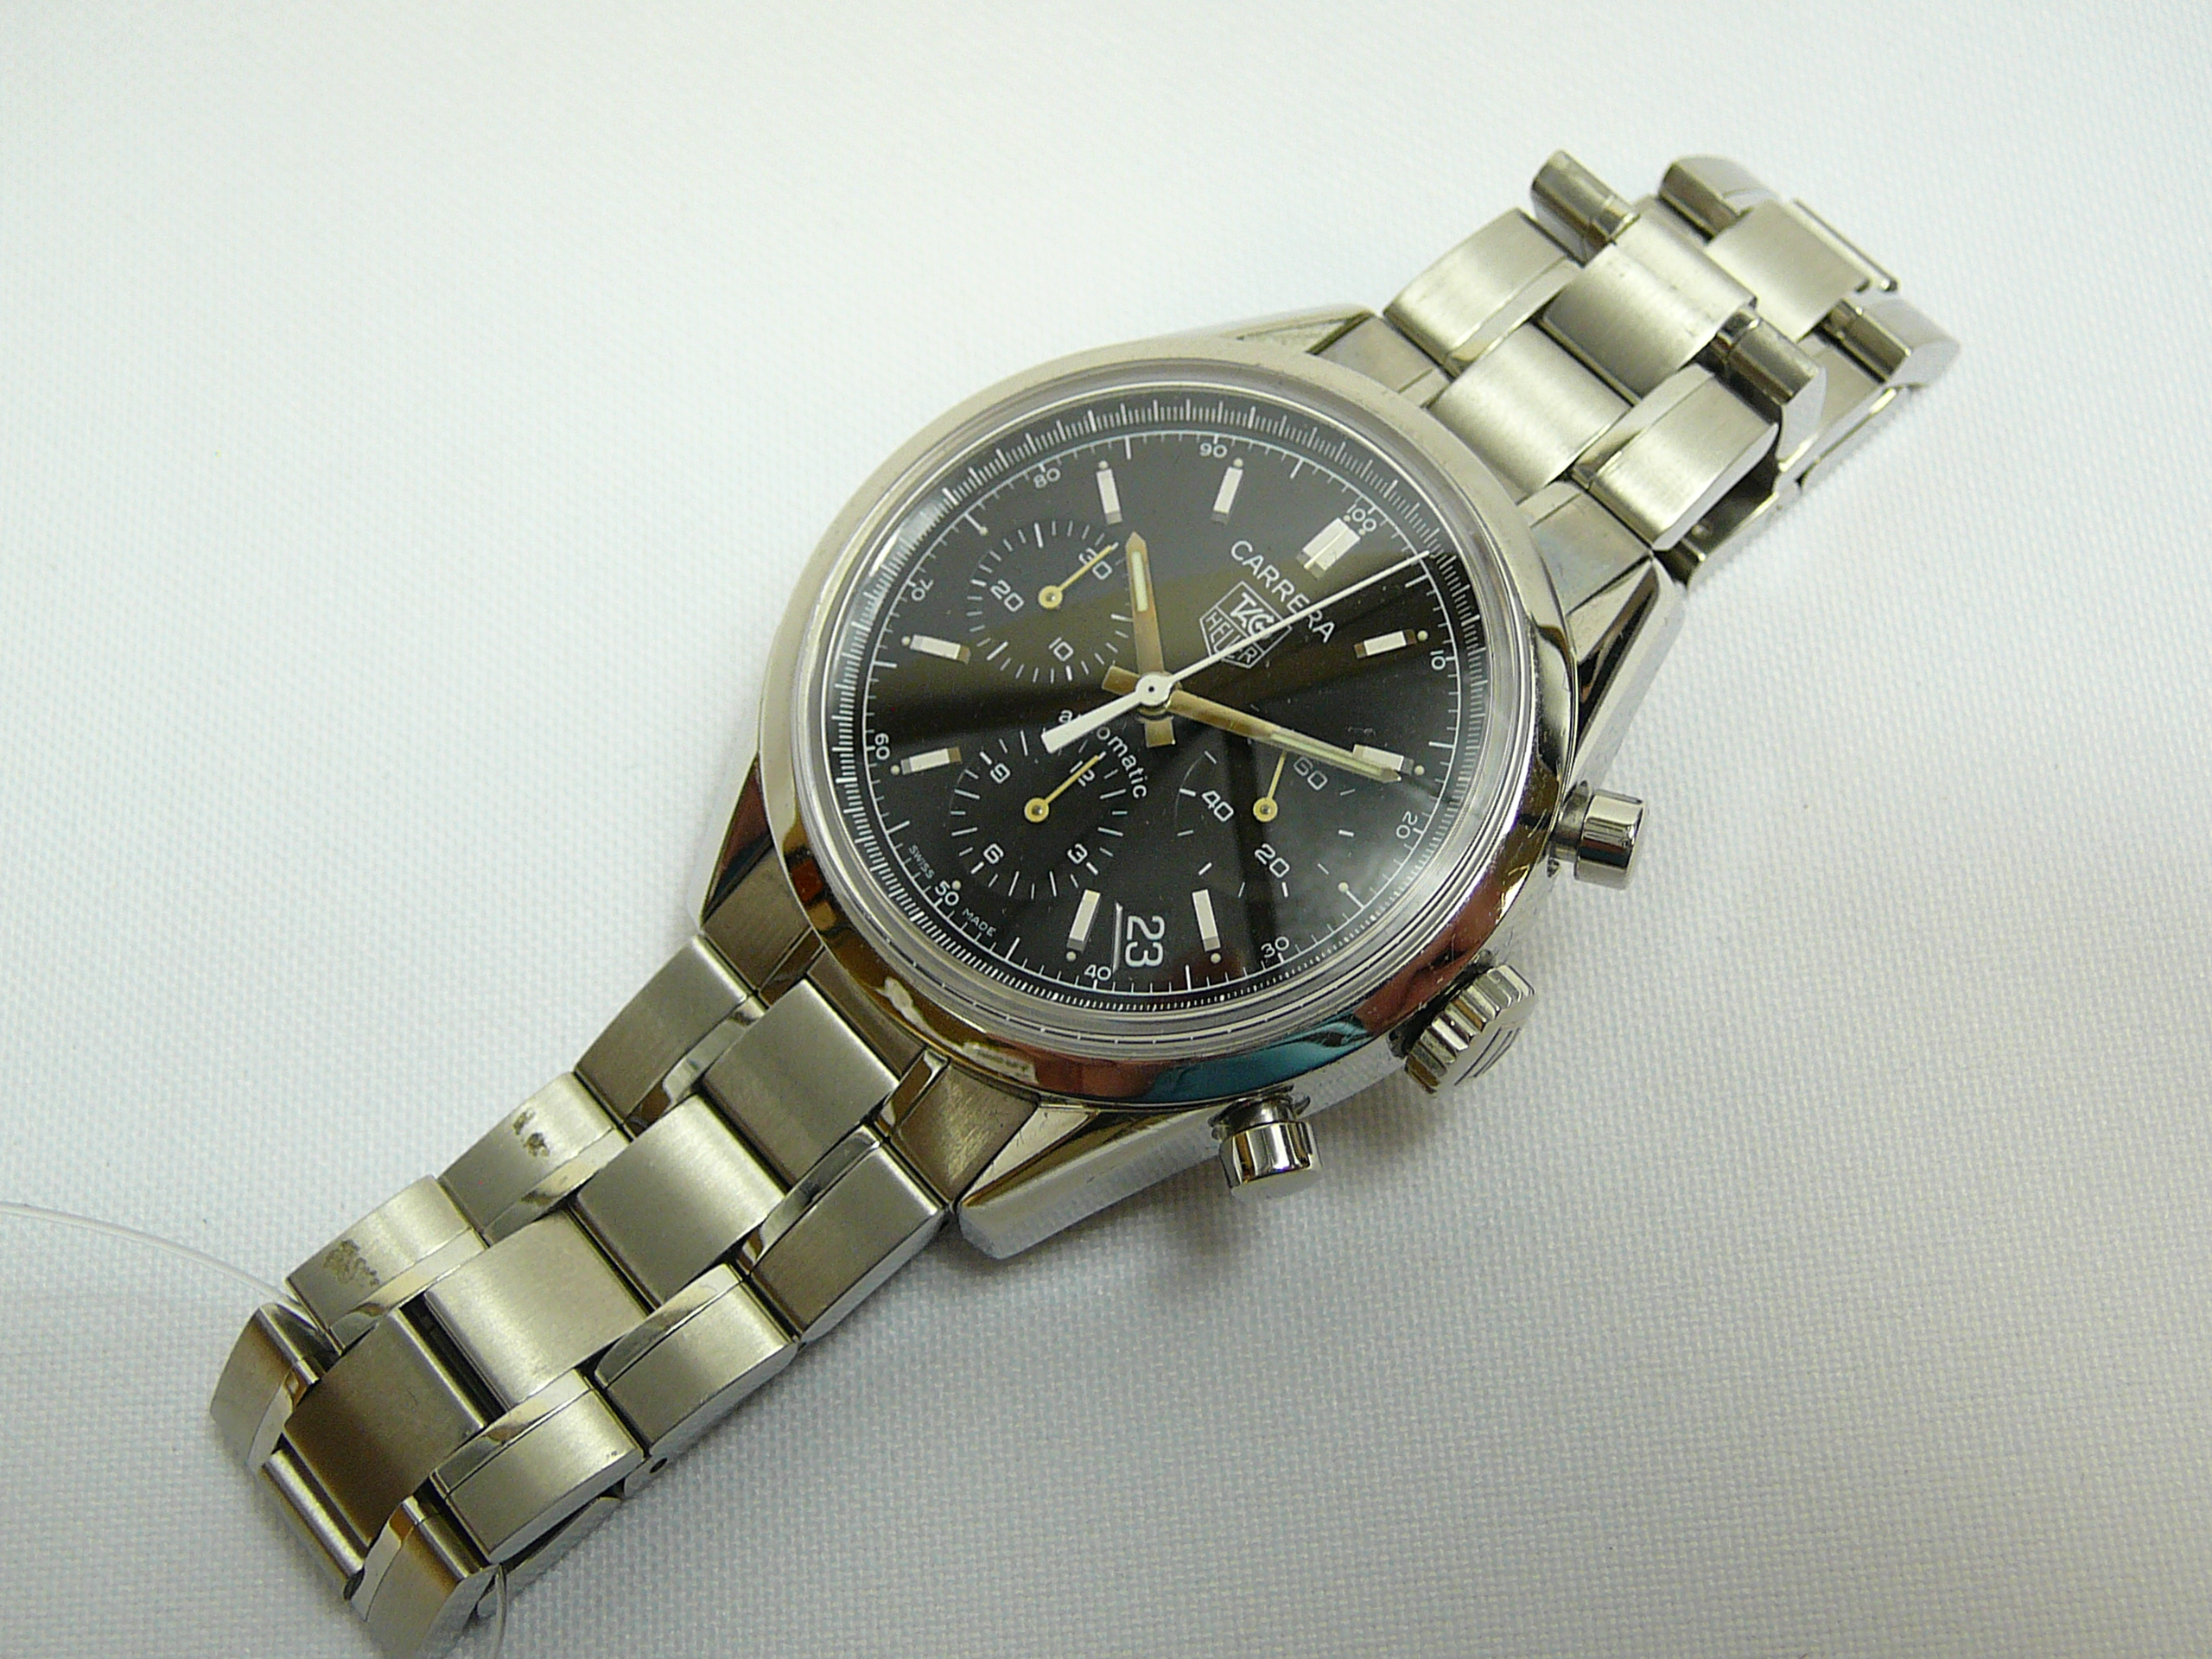 Gents Tag Heuer Wrist Watch - Image 2 of 5